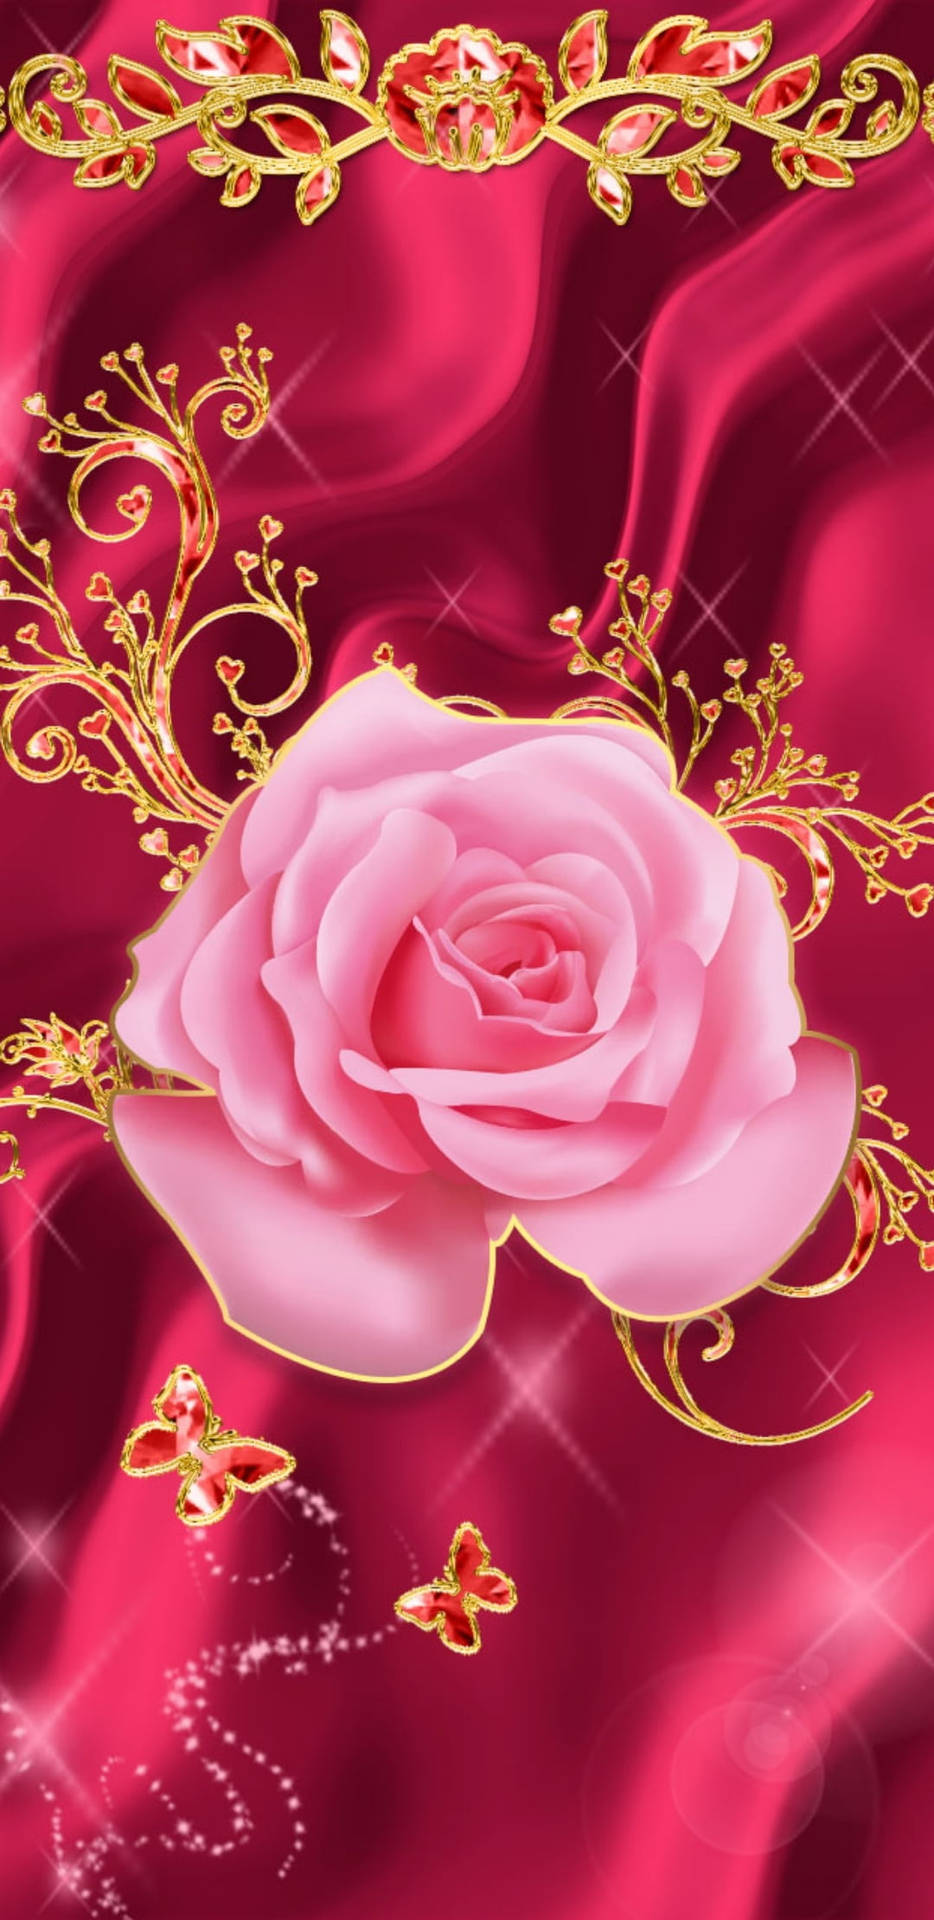 Girly And Sparkly Rose Background